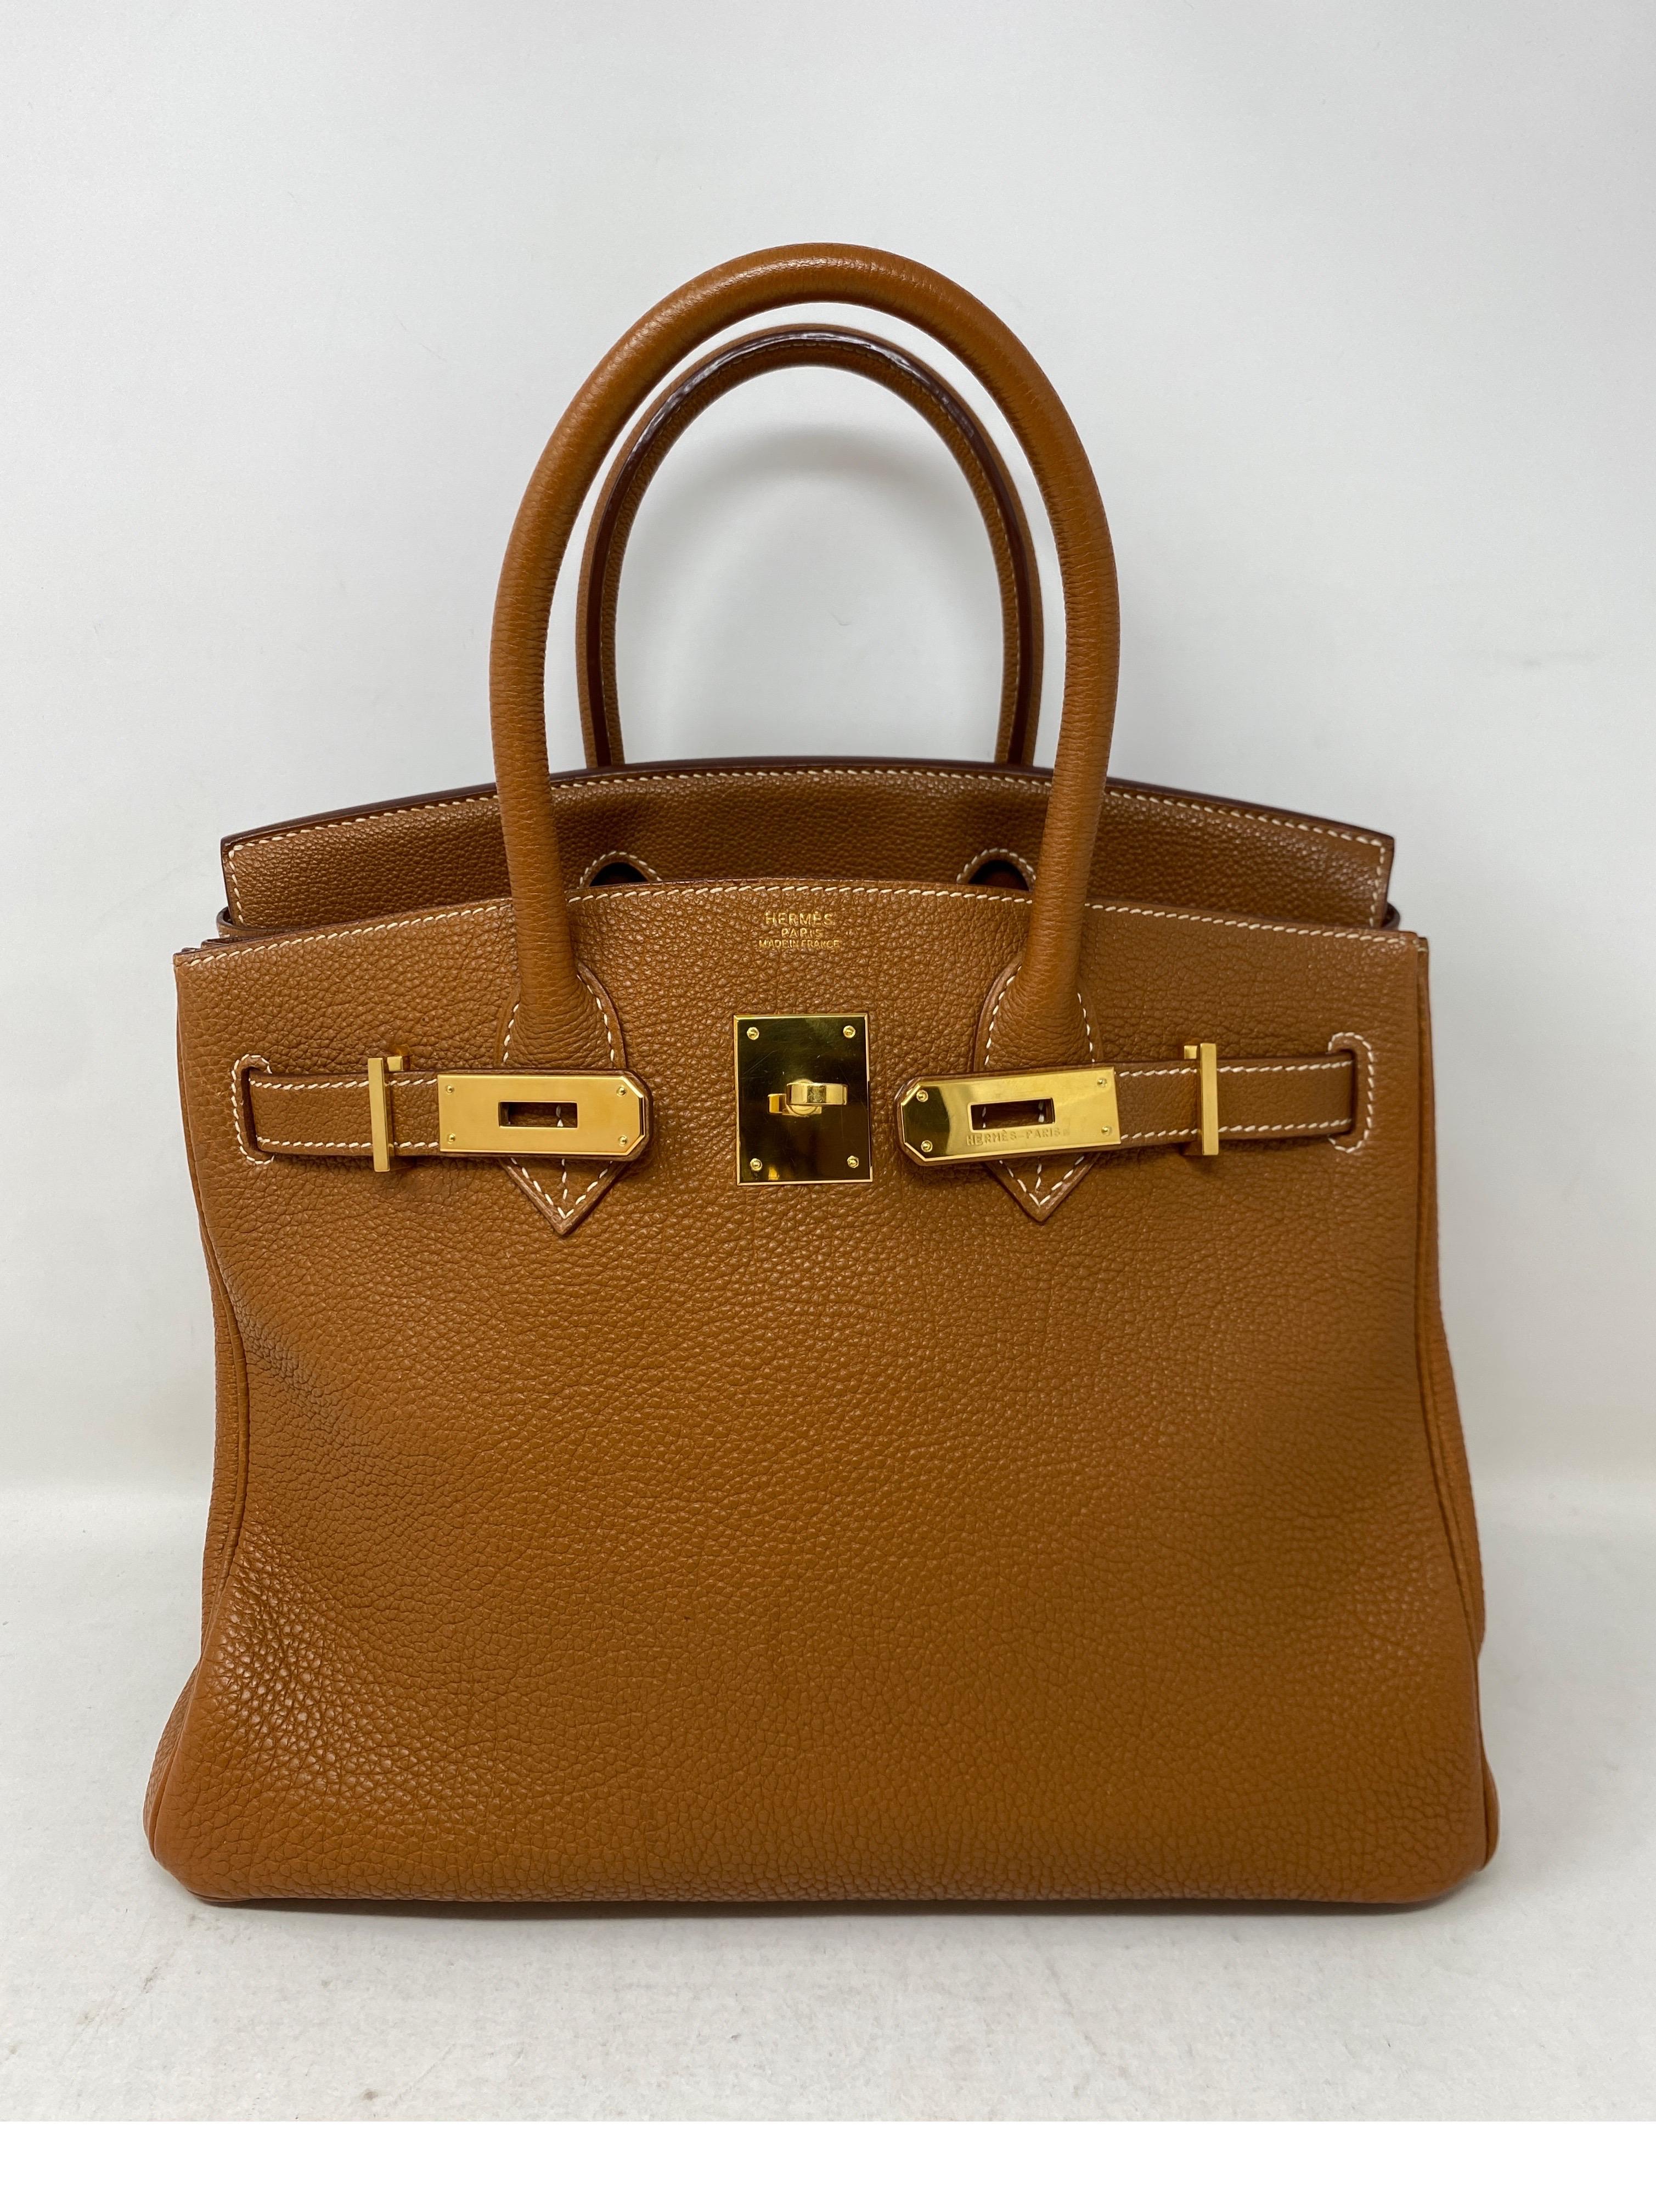 Hermes Birkin Gold 30 Bag. Gold tan color leather with gold hardware. The most wanted color combination. Great investment bag. Excellent condition. Includes clochette, lock, keys, and dust cover. Guaranteed authentic. 